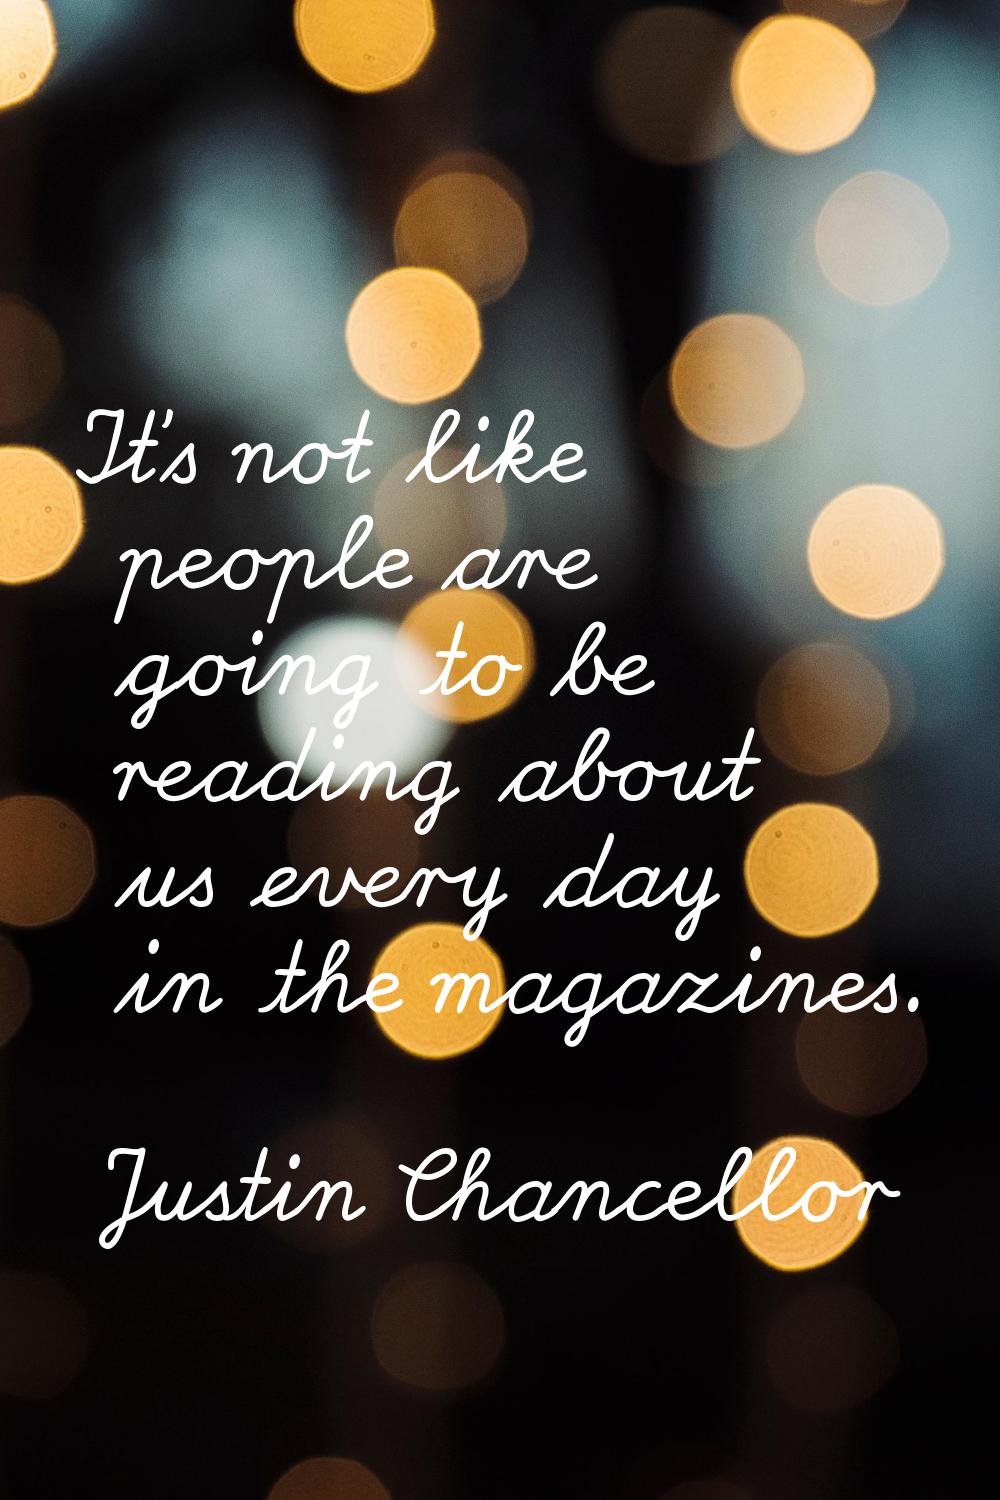 It's not like people are going to be reading about us every day in the magazines.